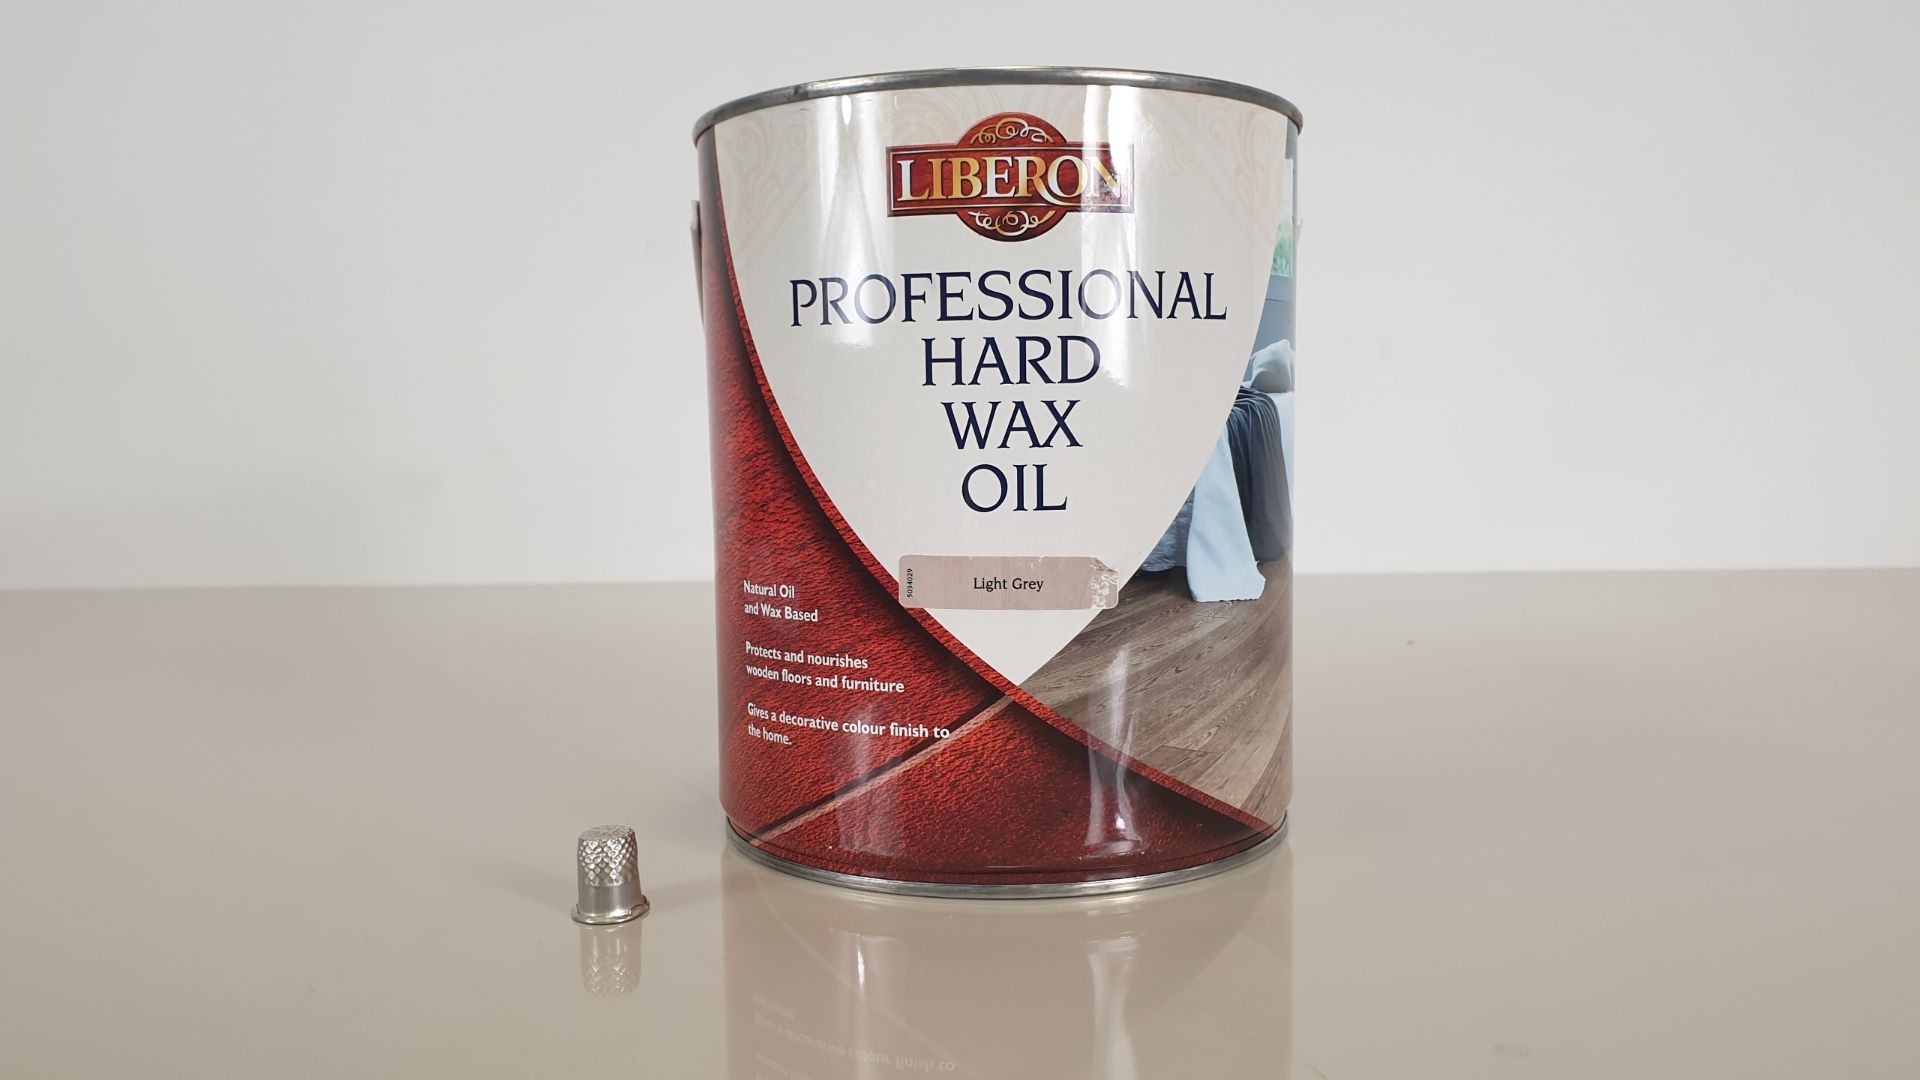 (LOT FOR THURSDAY 28TH MAY AUCTION) 10 X LIBERON 2.5 LITRE PROFESSIONAL HARD WAX OIL - LIGHT GREY